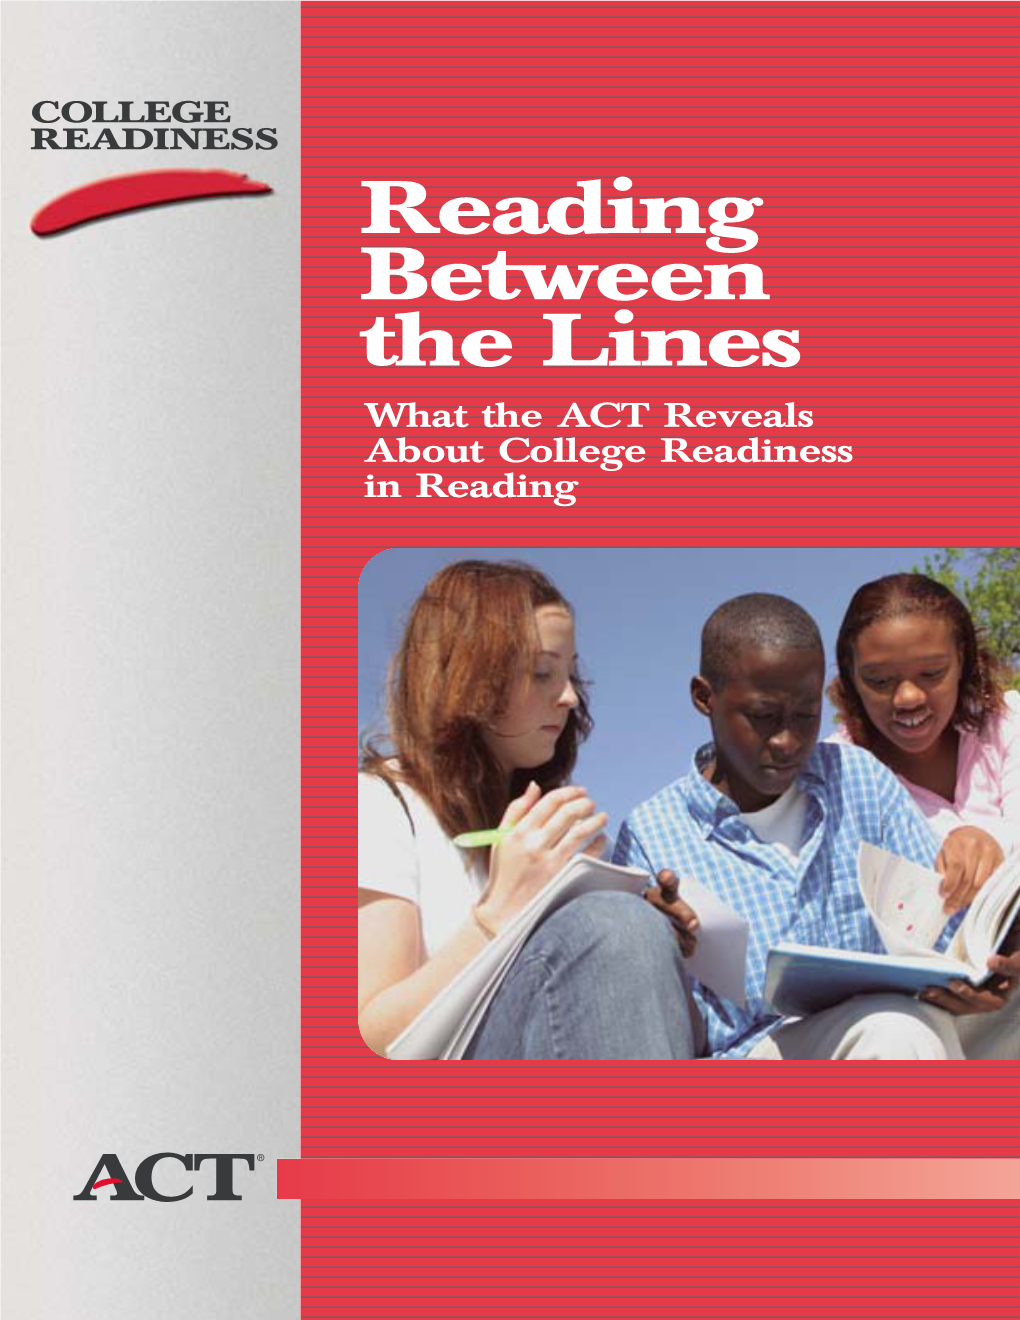 Reading Between the Lines: What the ACT Reveals About College